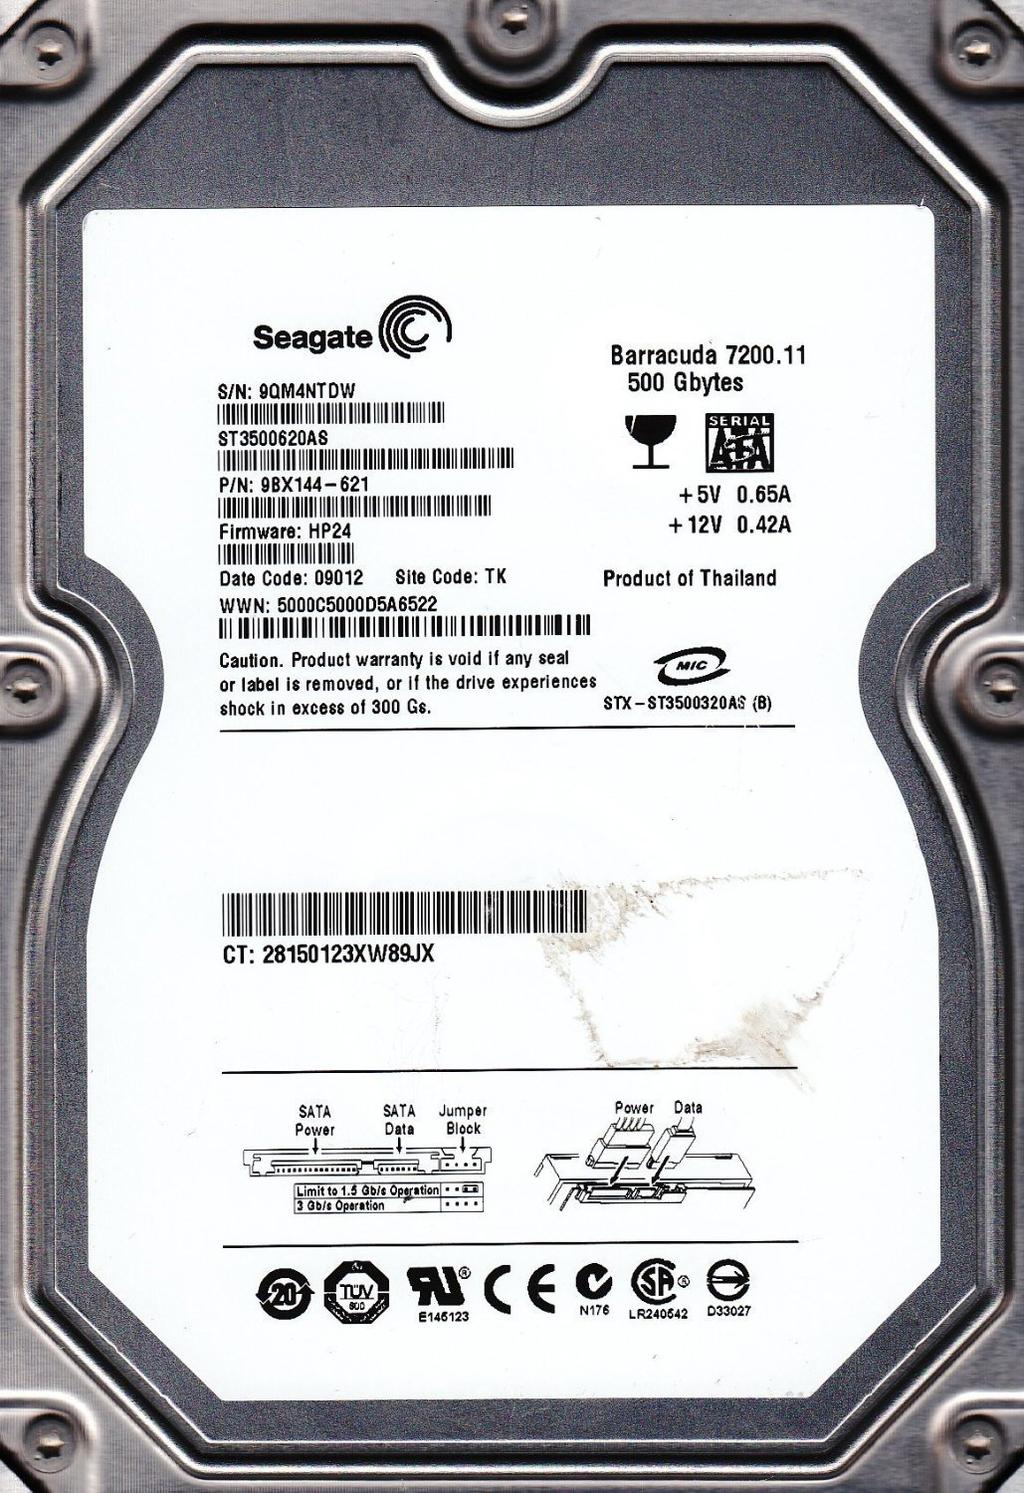 ST3500620AS Seagate Barracuda 7200.11 #ST3500620AS $2958 Hard Drive ST3500620AS KINGSTON ENCLOUSER 2.5 TO 3.